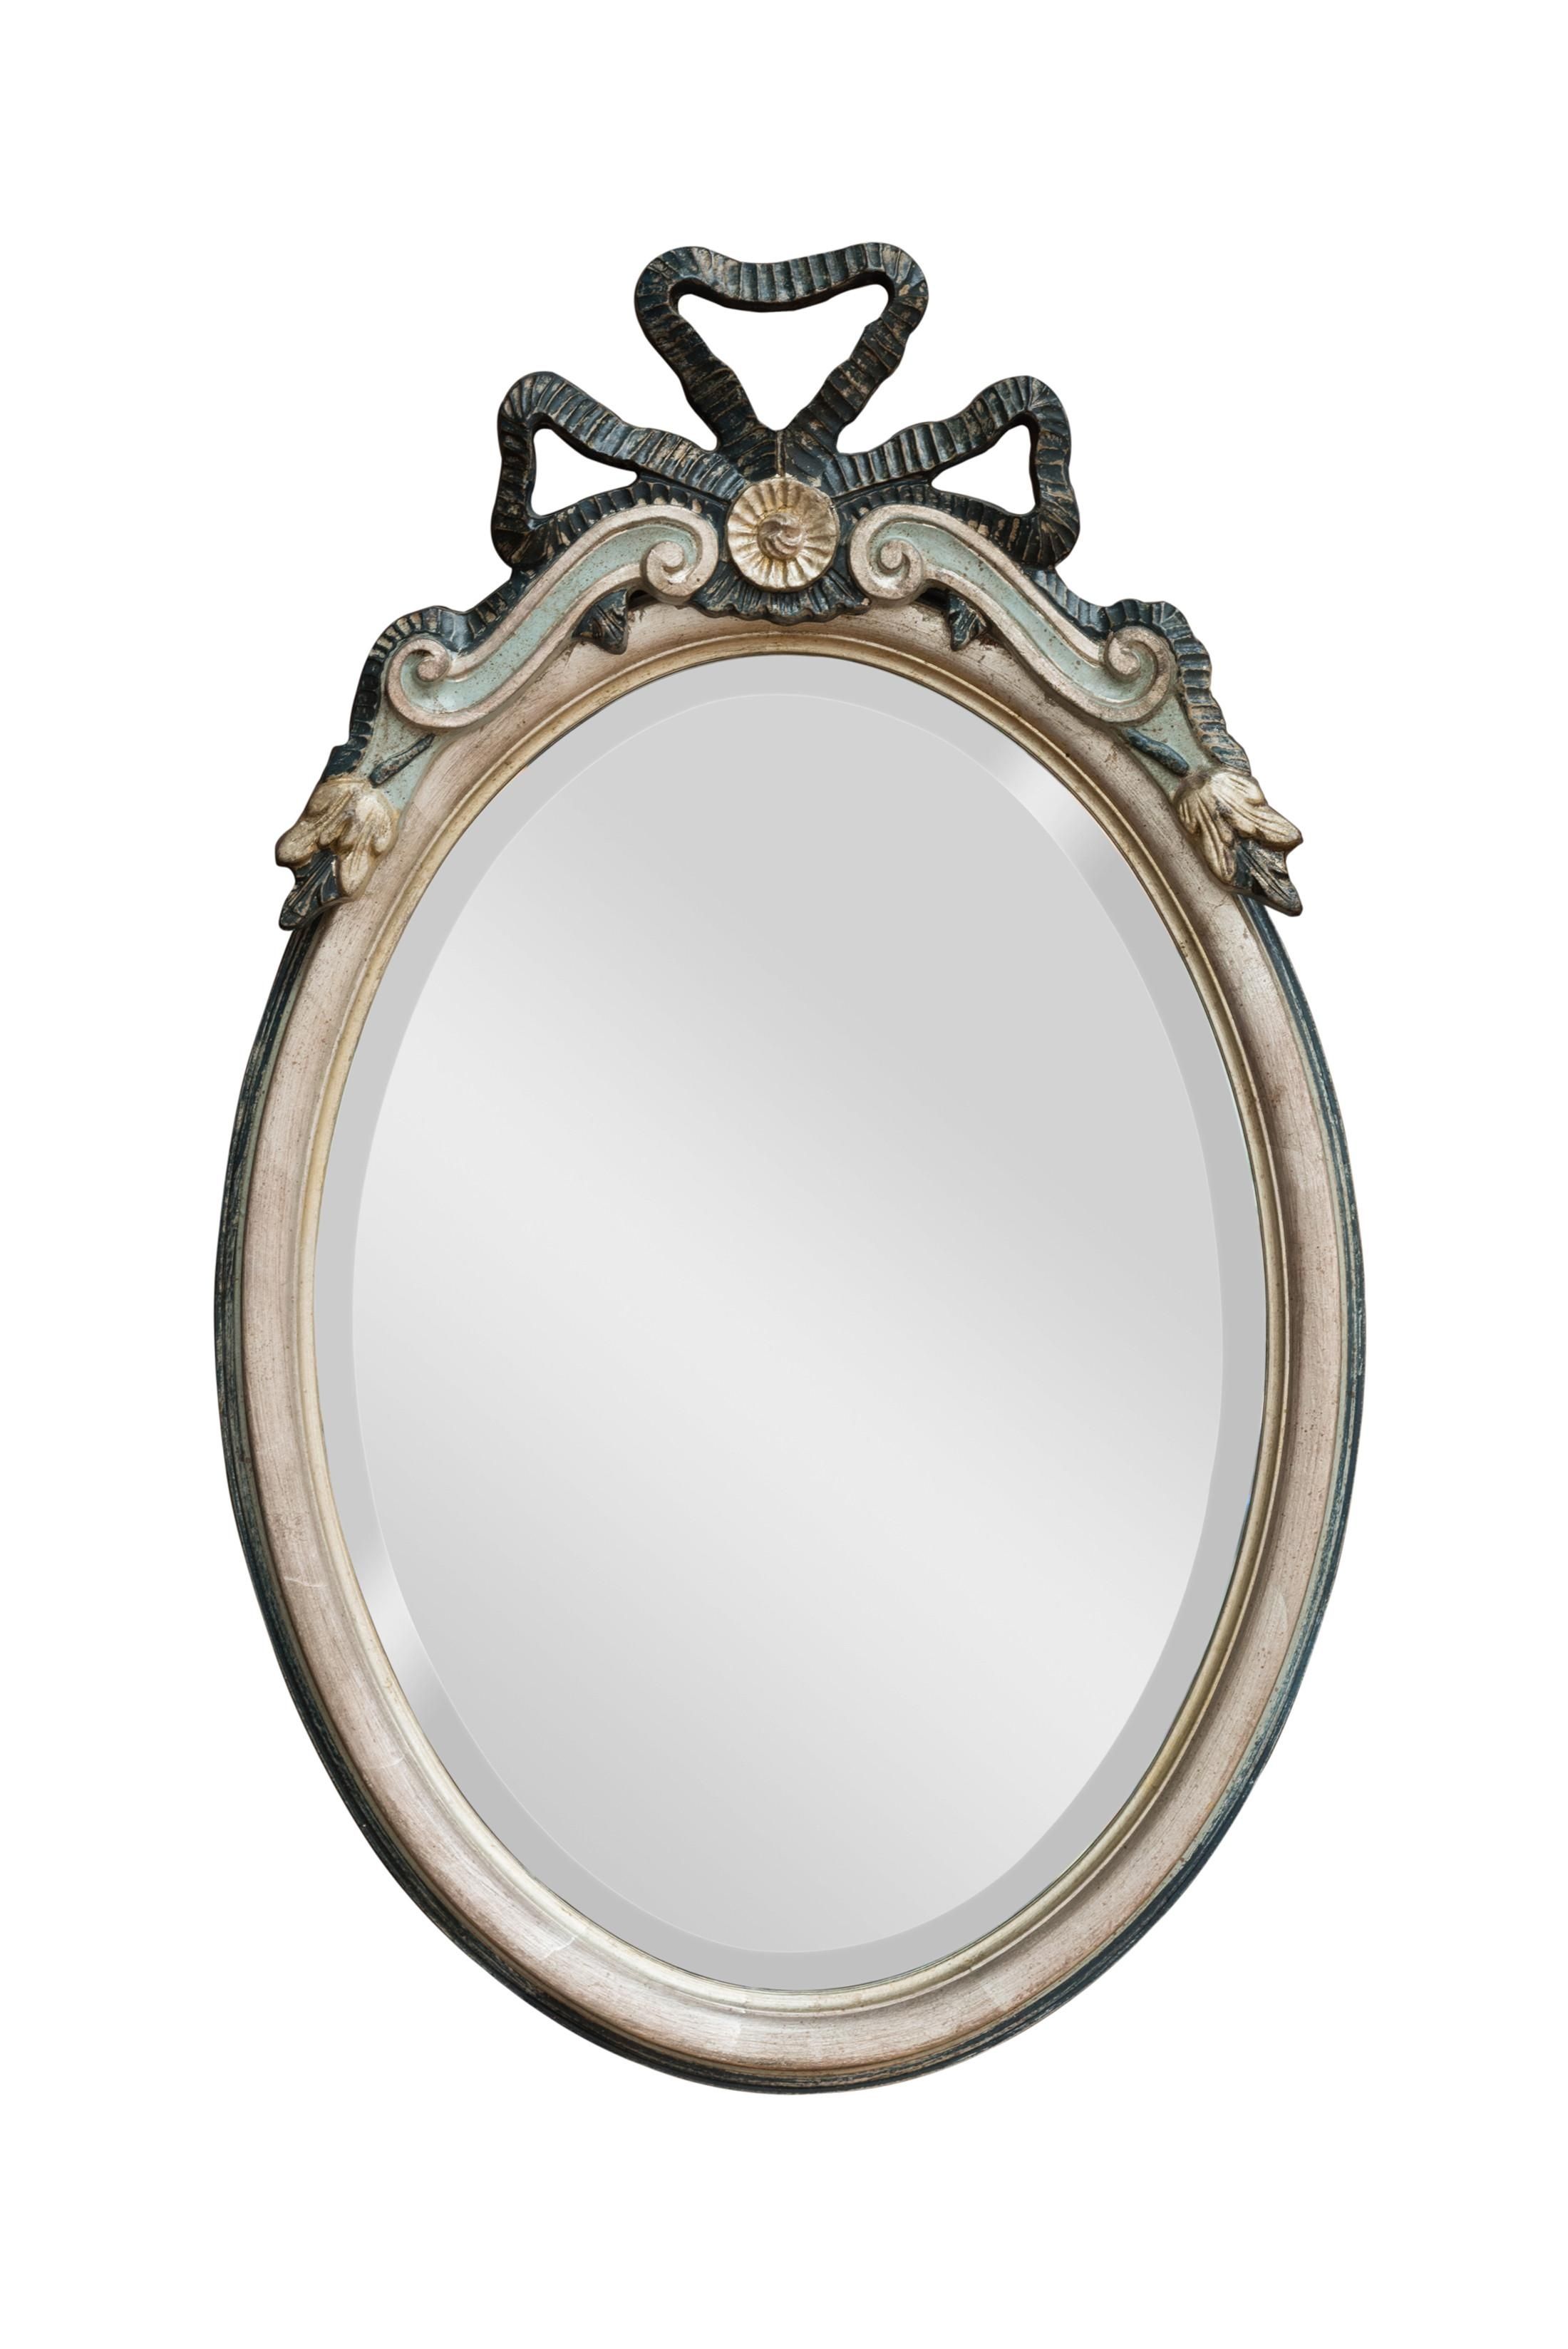 Bow Top Oval Mirror Silver Leaf Intended For Gold Oval Mirrors (View 18 of 20)